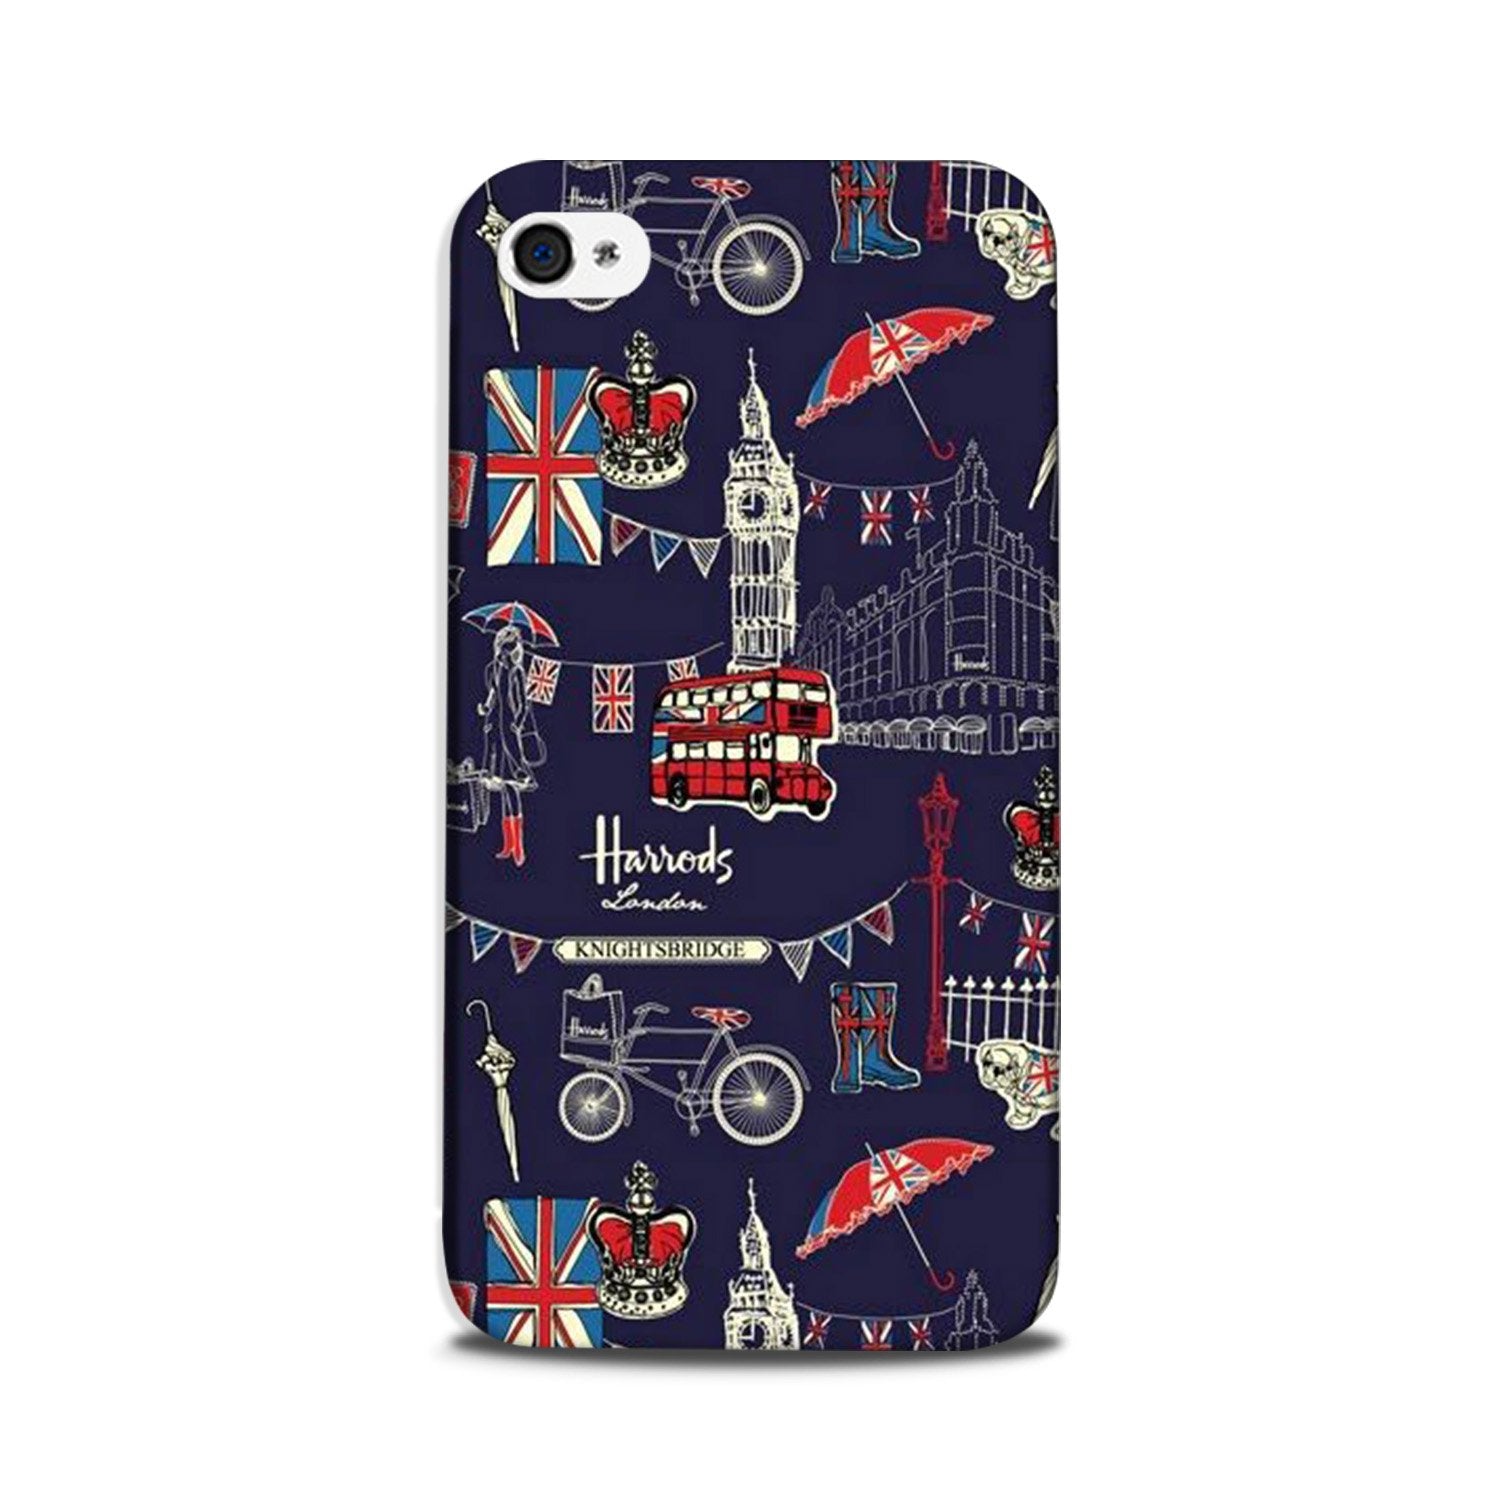 Love London Case for iPhone 5/ 5s